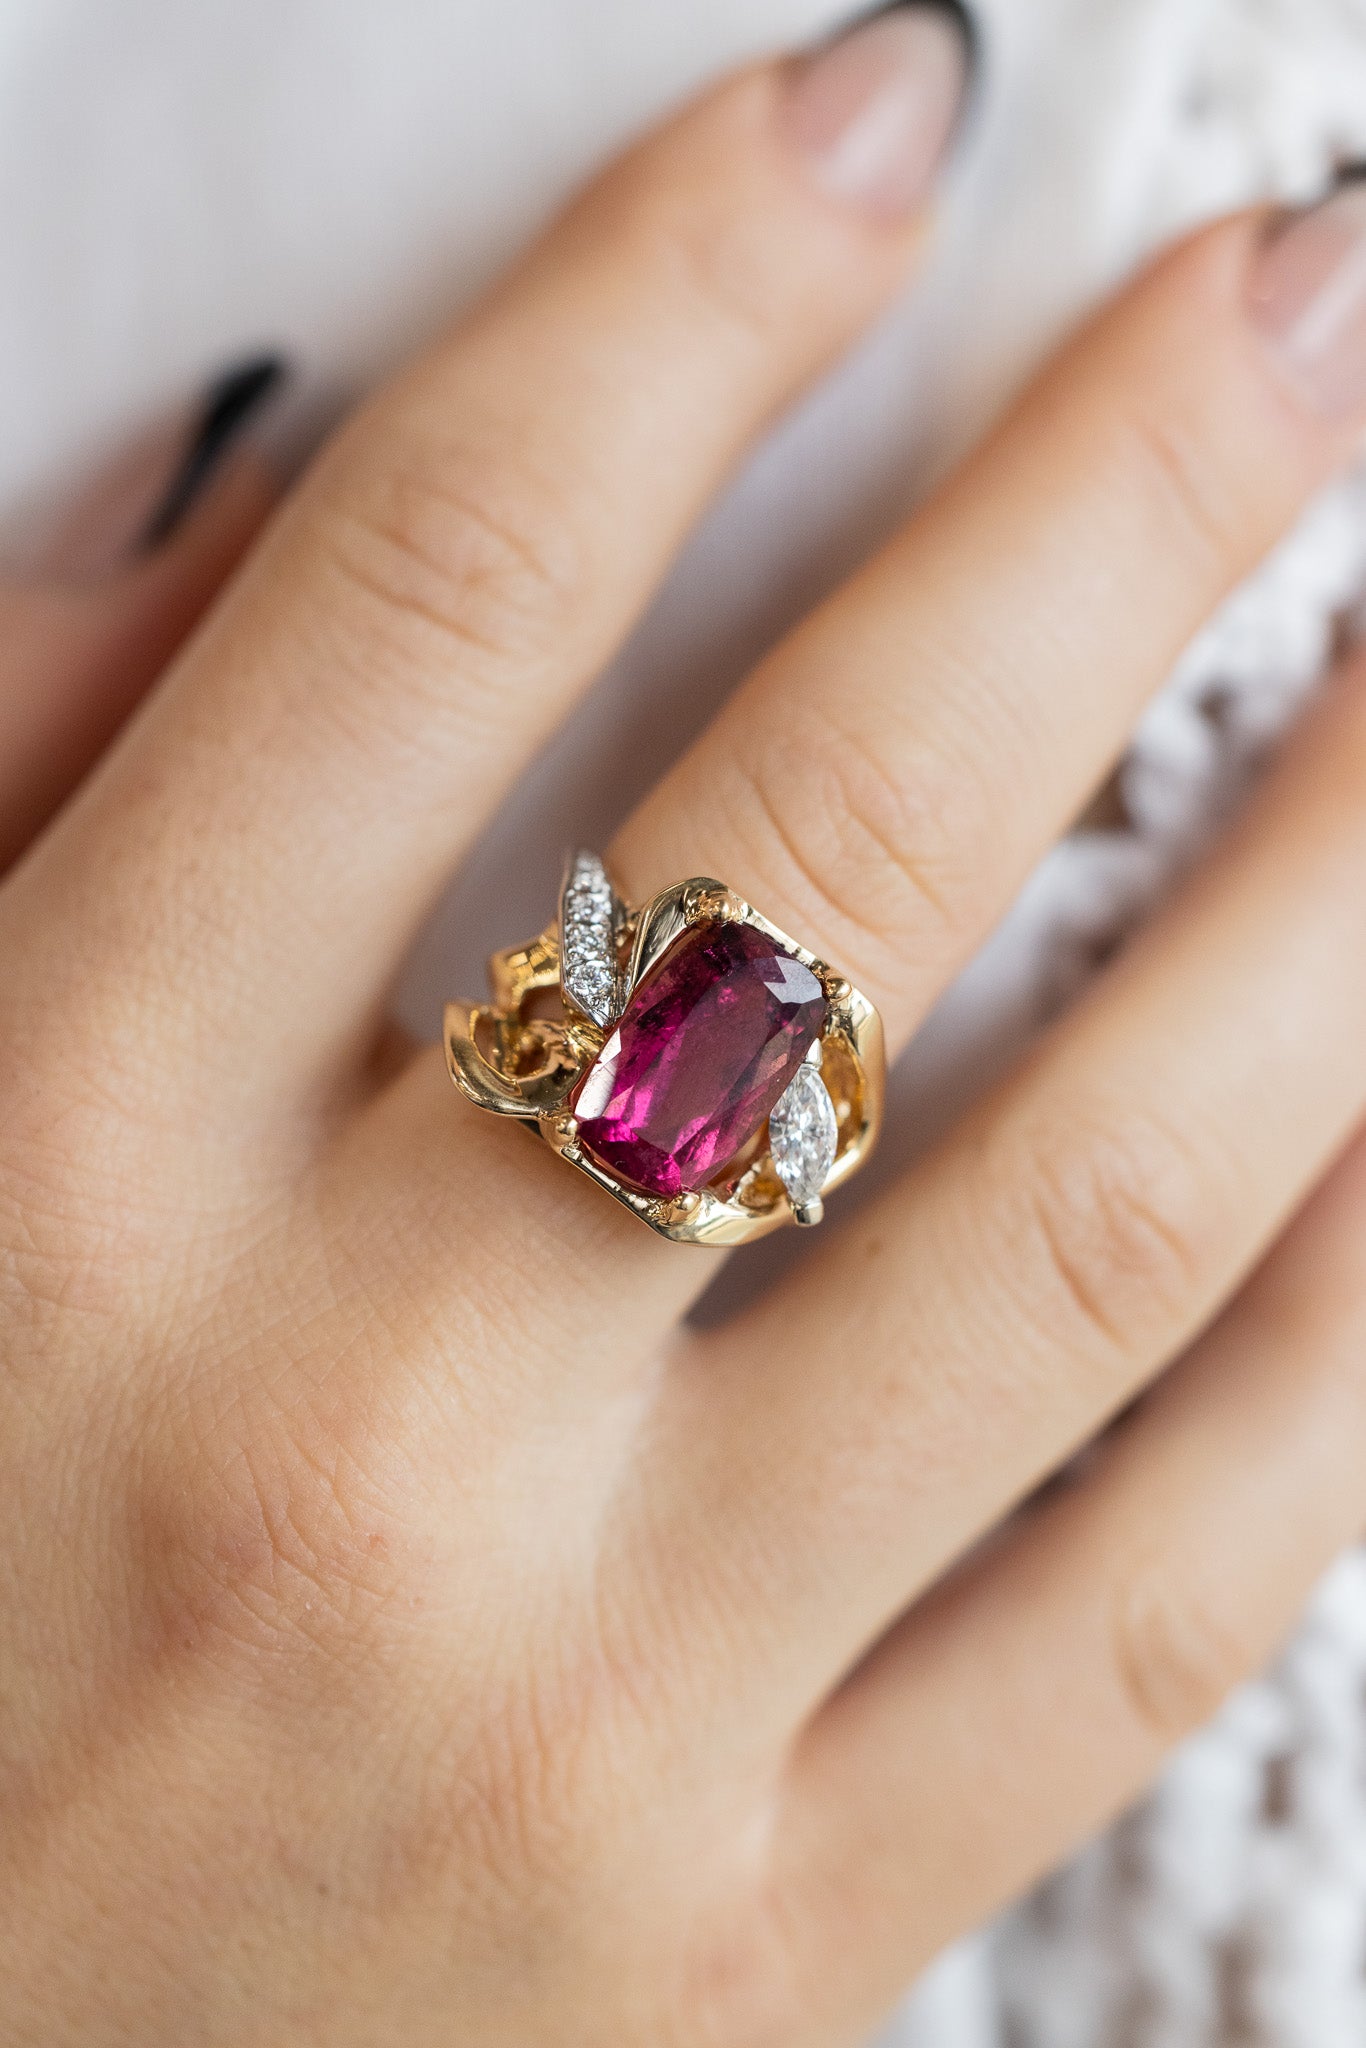 Pink Tourmaline Ring, Antique Style Ring, Dainty Pink Ring, Vintage Ri |  Antique style rings, Pink tourmaline ring, Opal ring gold